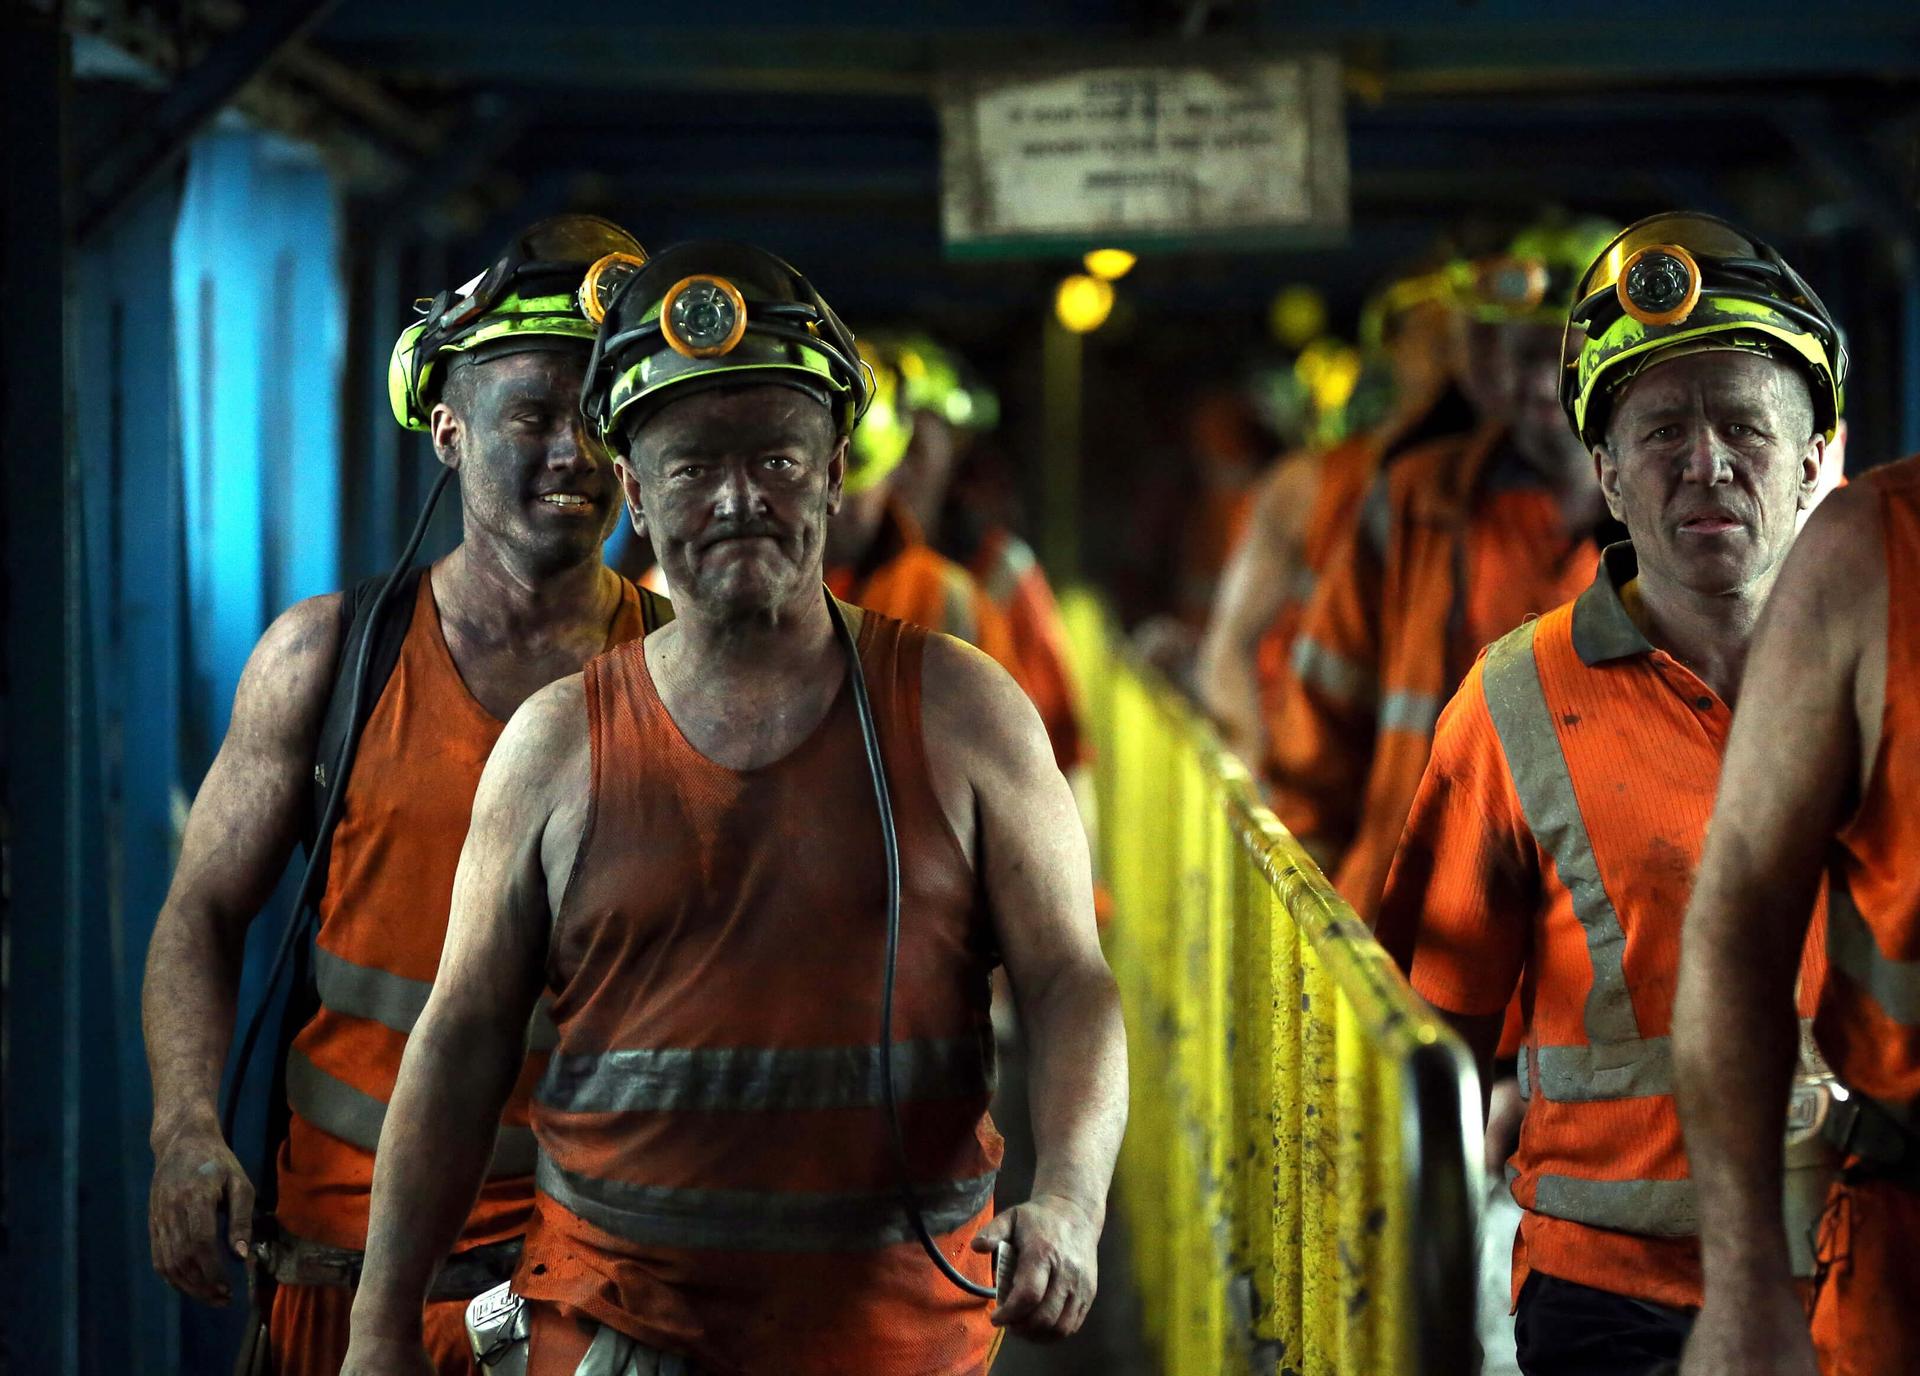 Miners leave after working the final shift at Kellingley Colliery